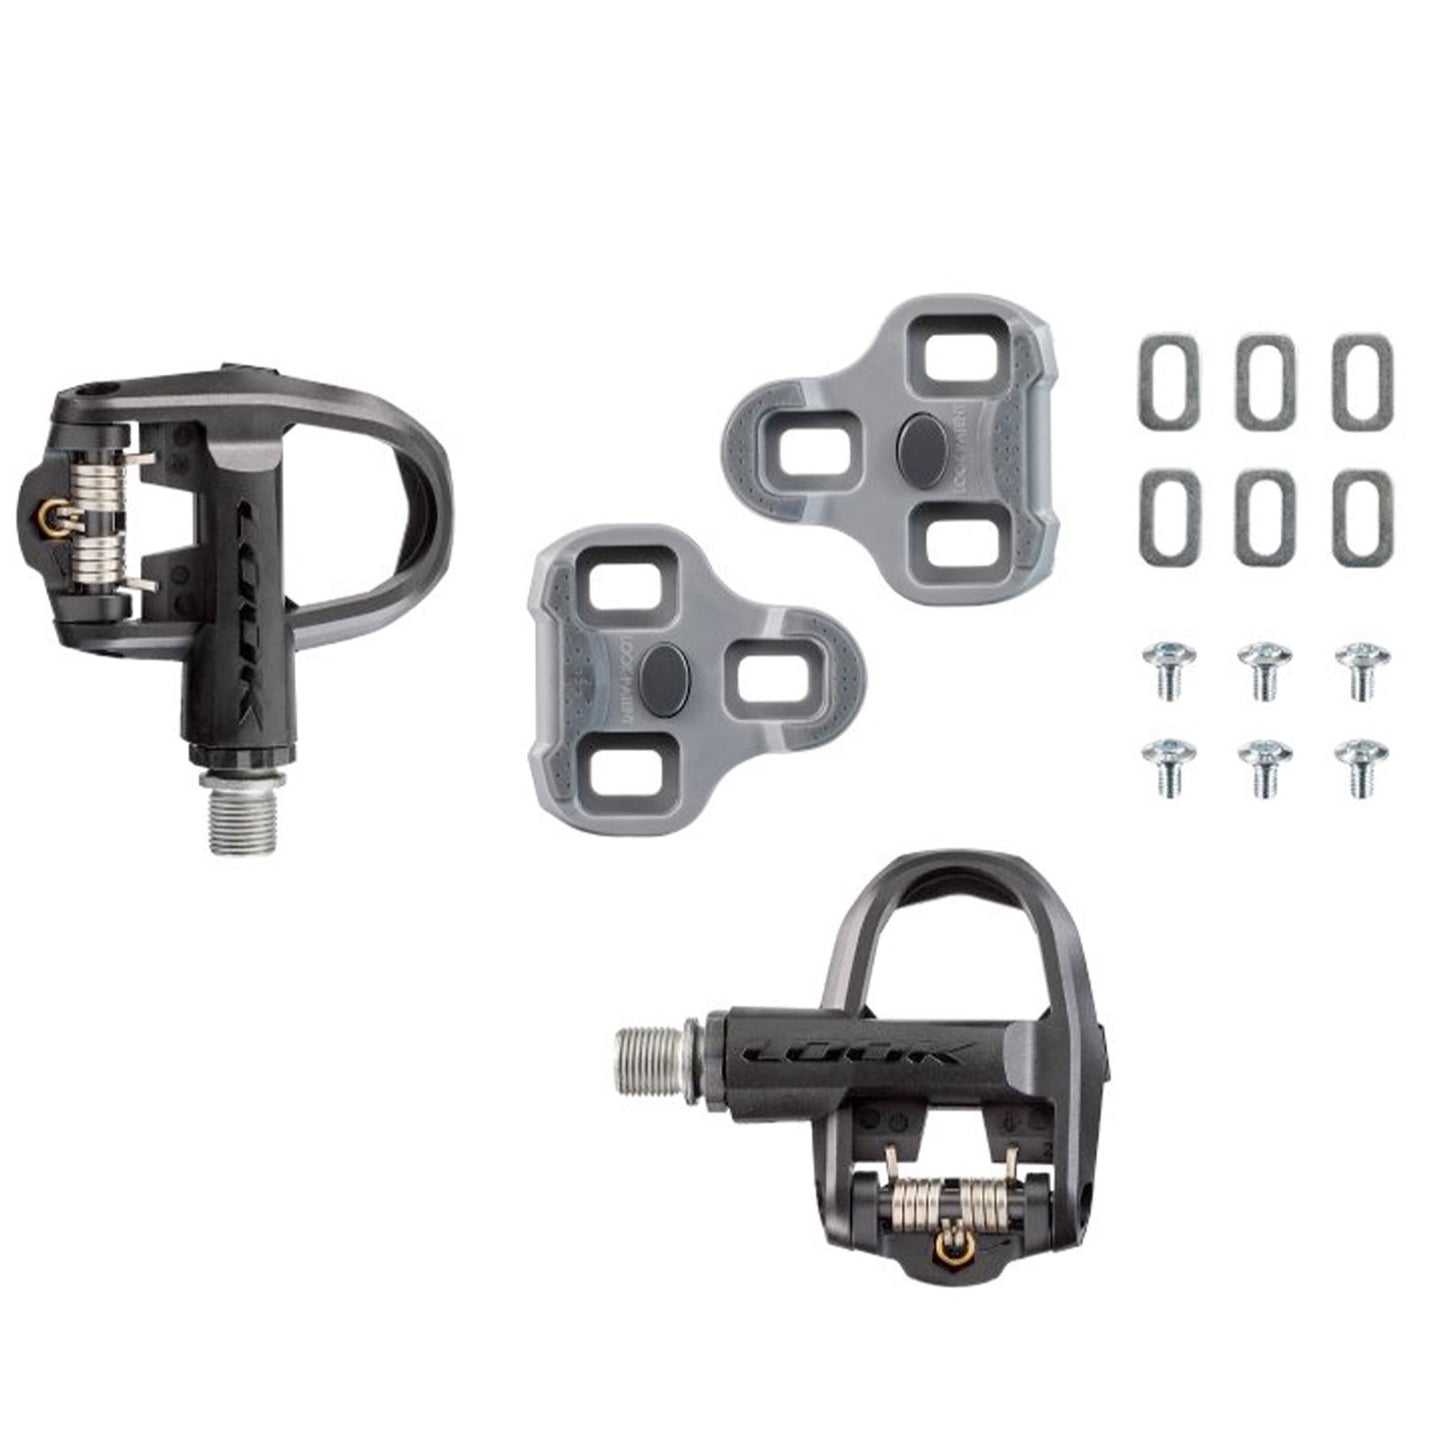 Look Keo Classic 3 Road Pedals With Keo Grip Cleats - Black